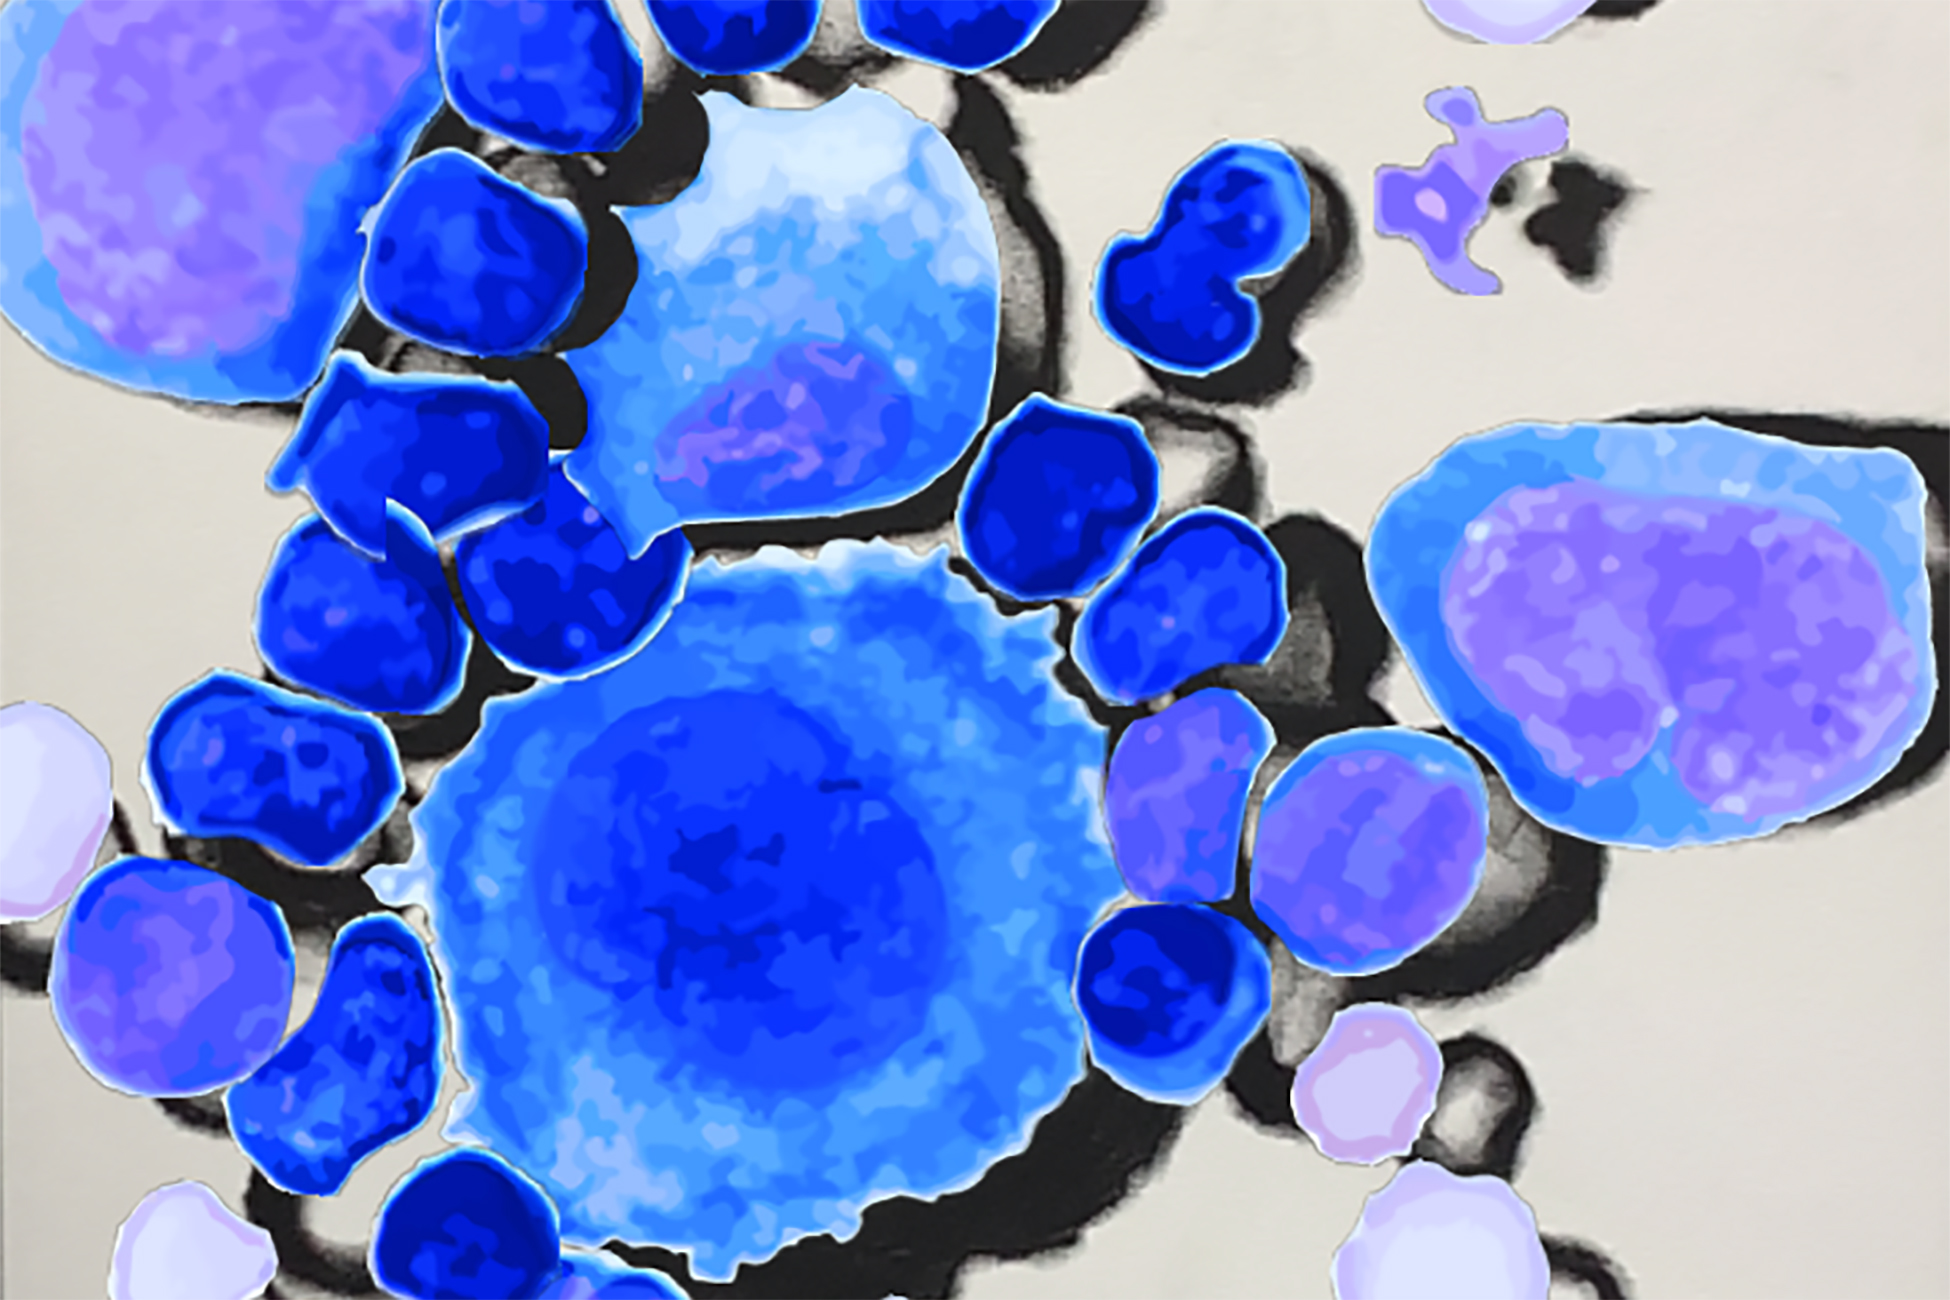 piece of art with lots of blue-looking cells